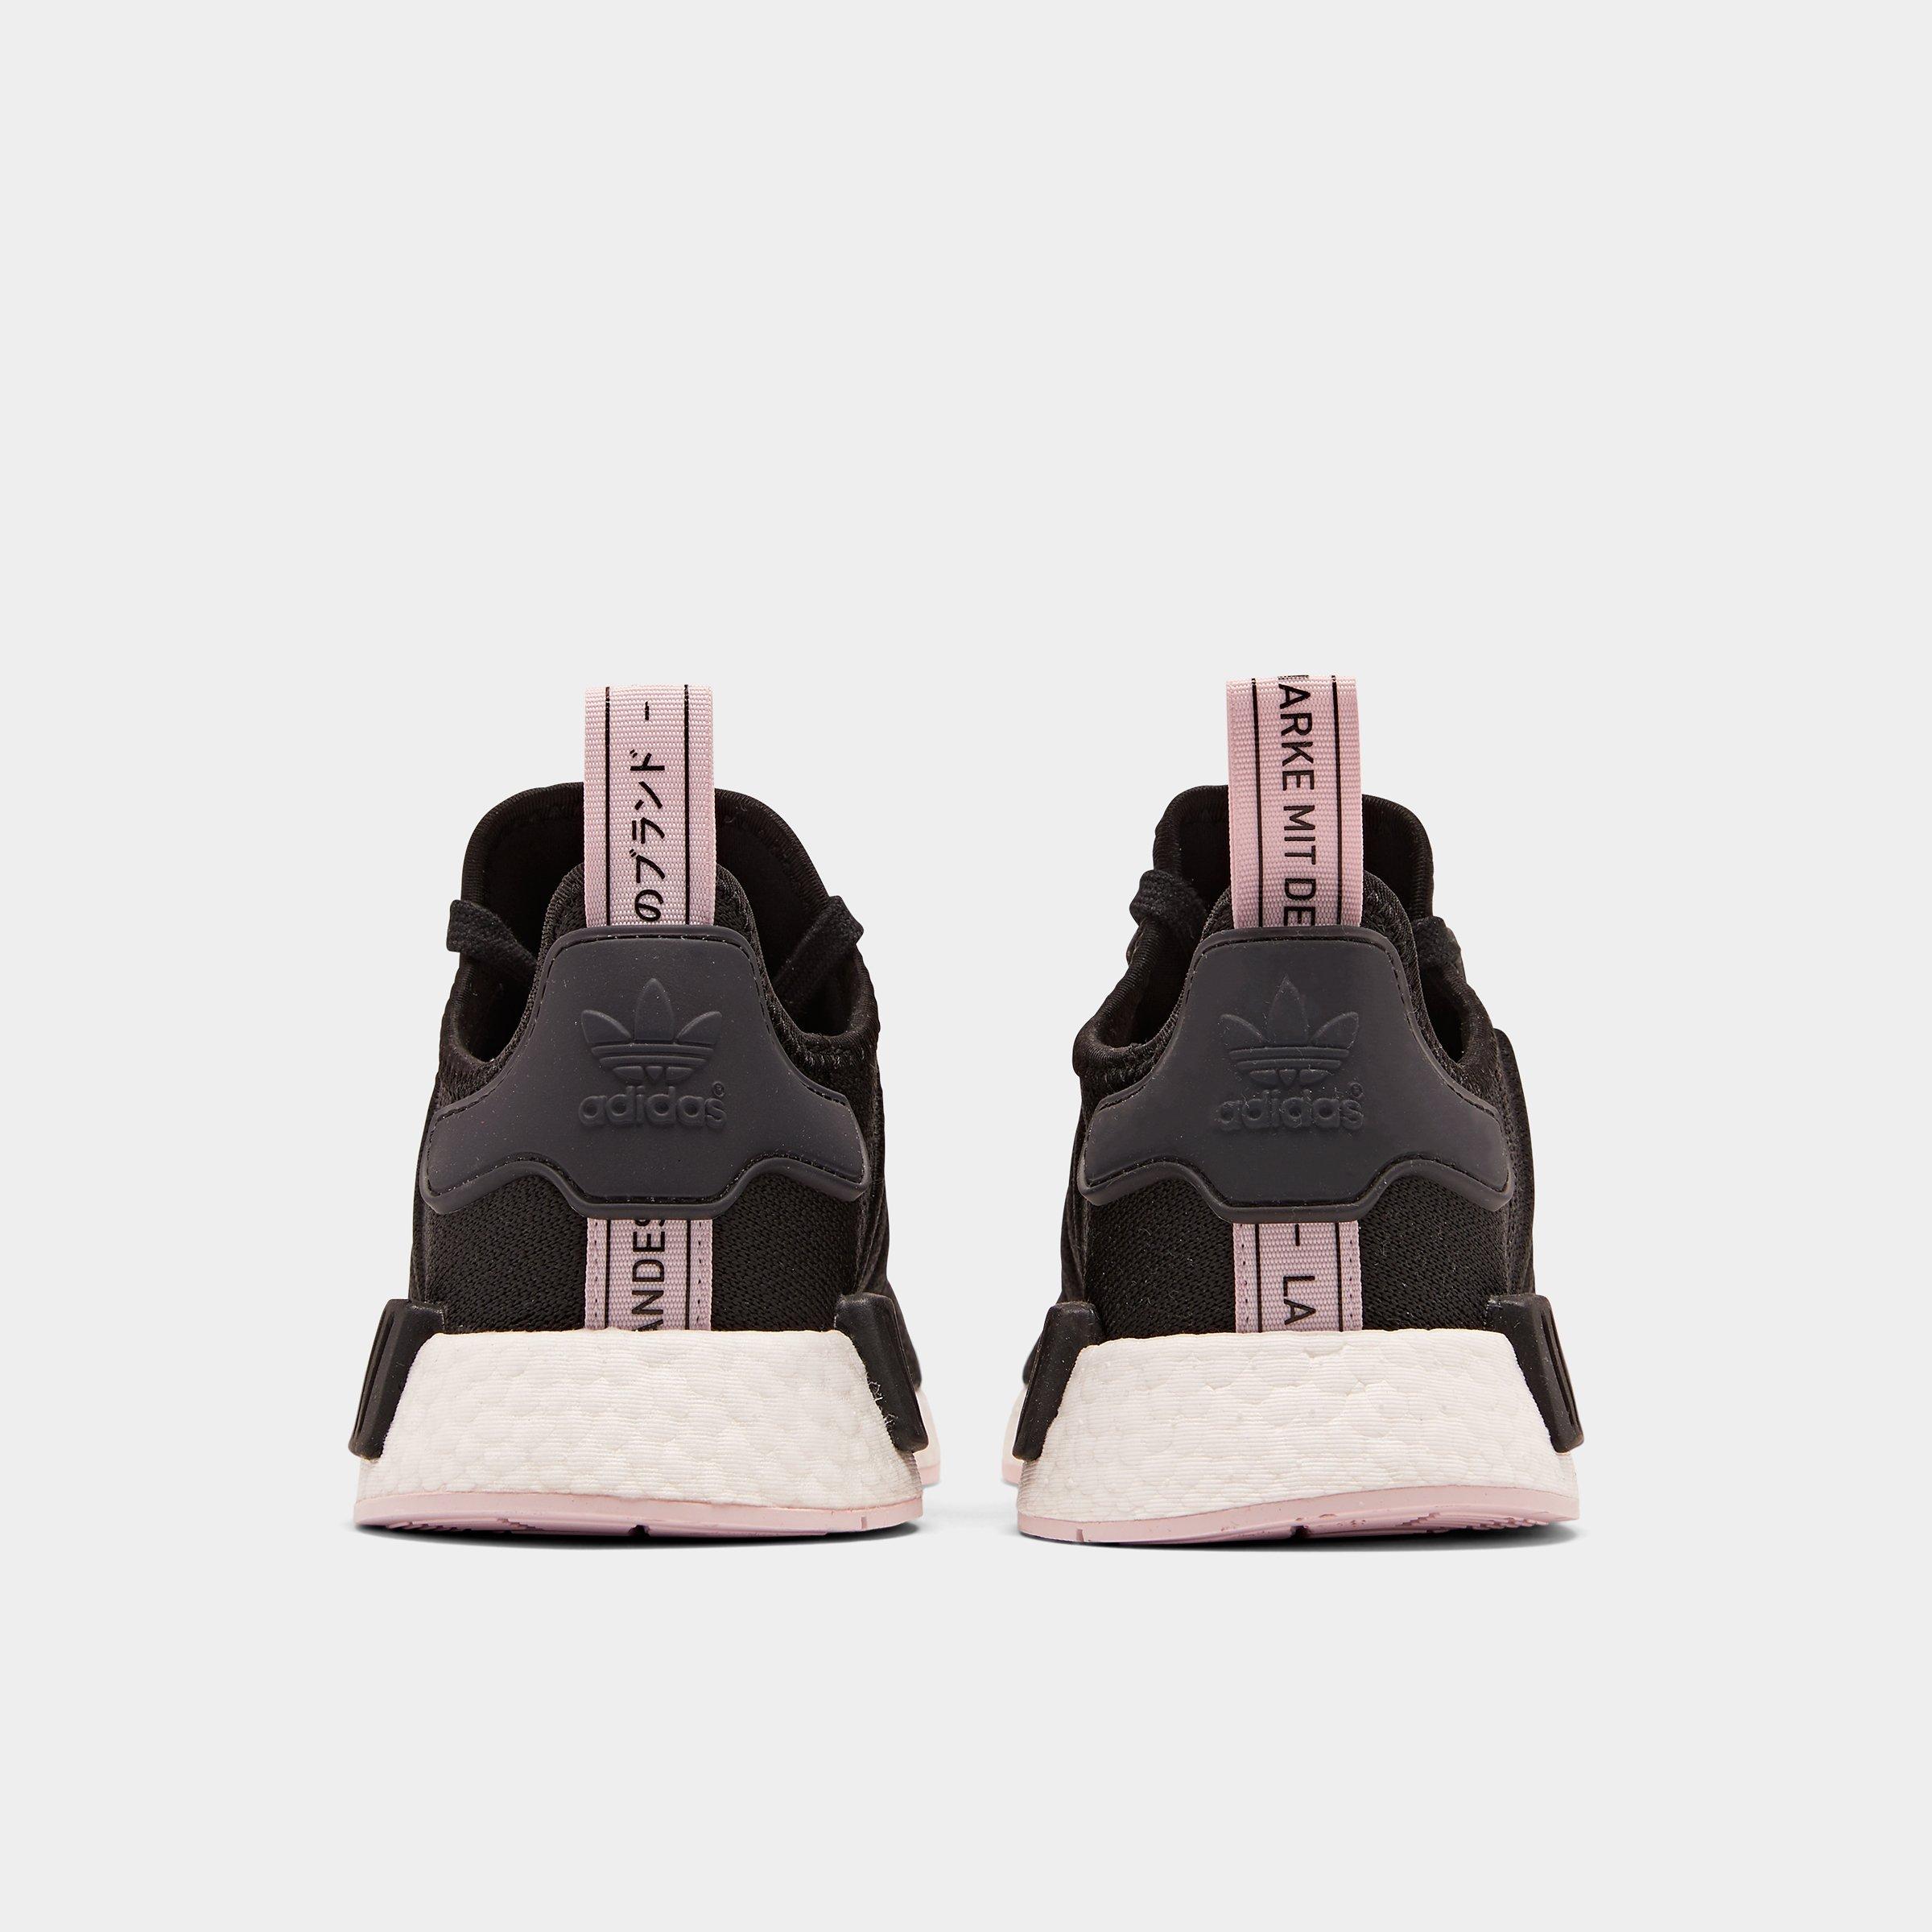 adidas women's nmd runner casual shoes